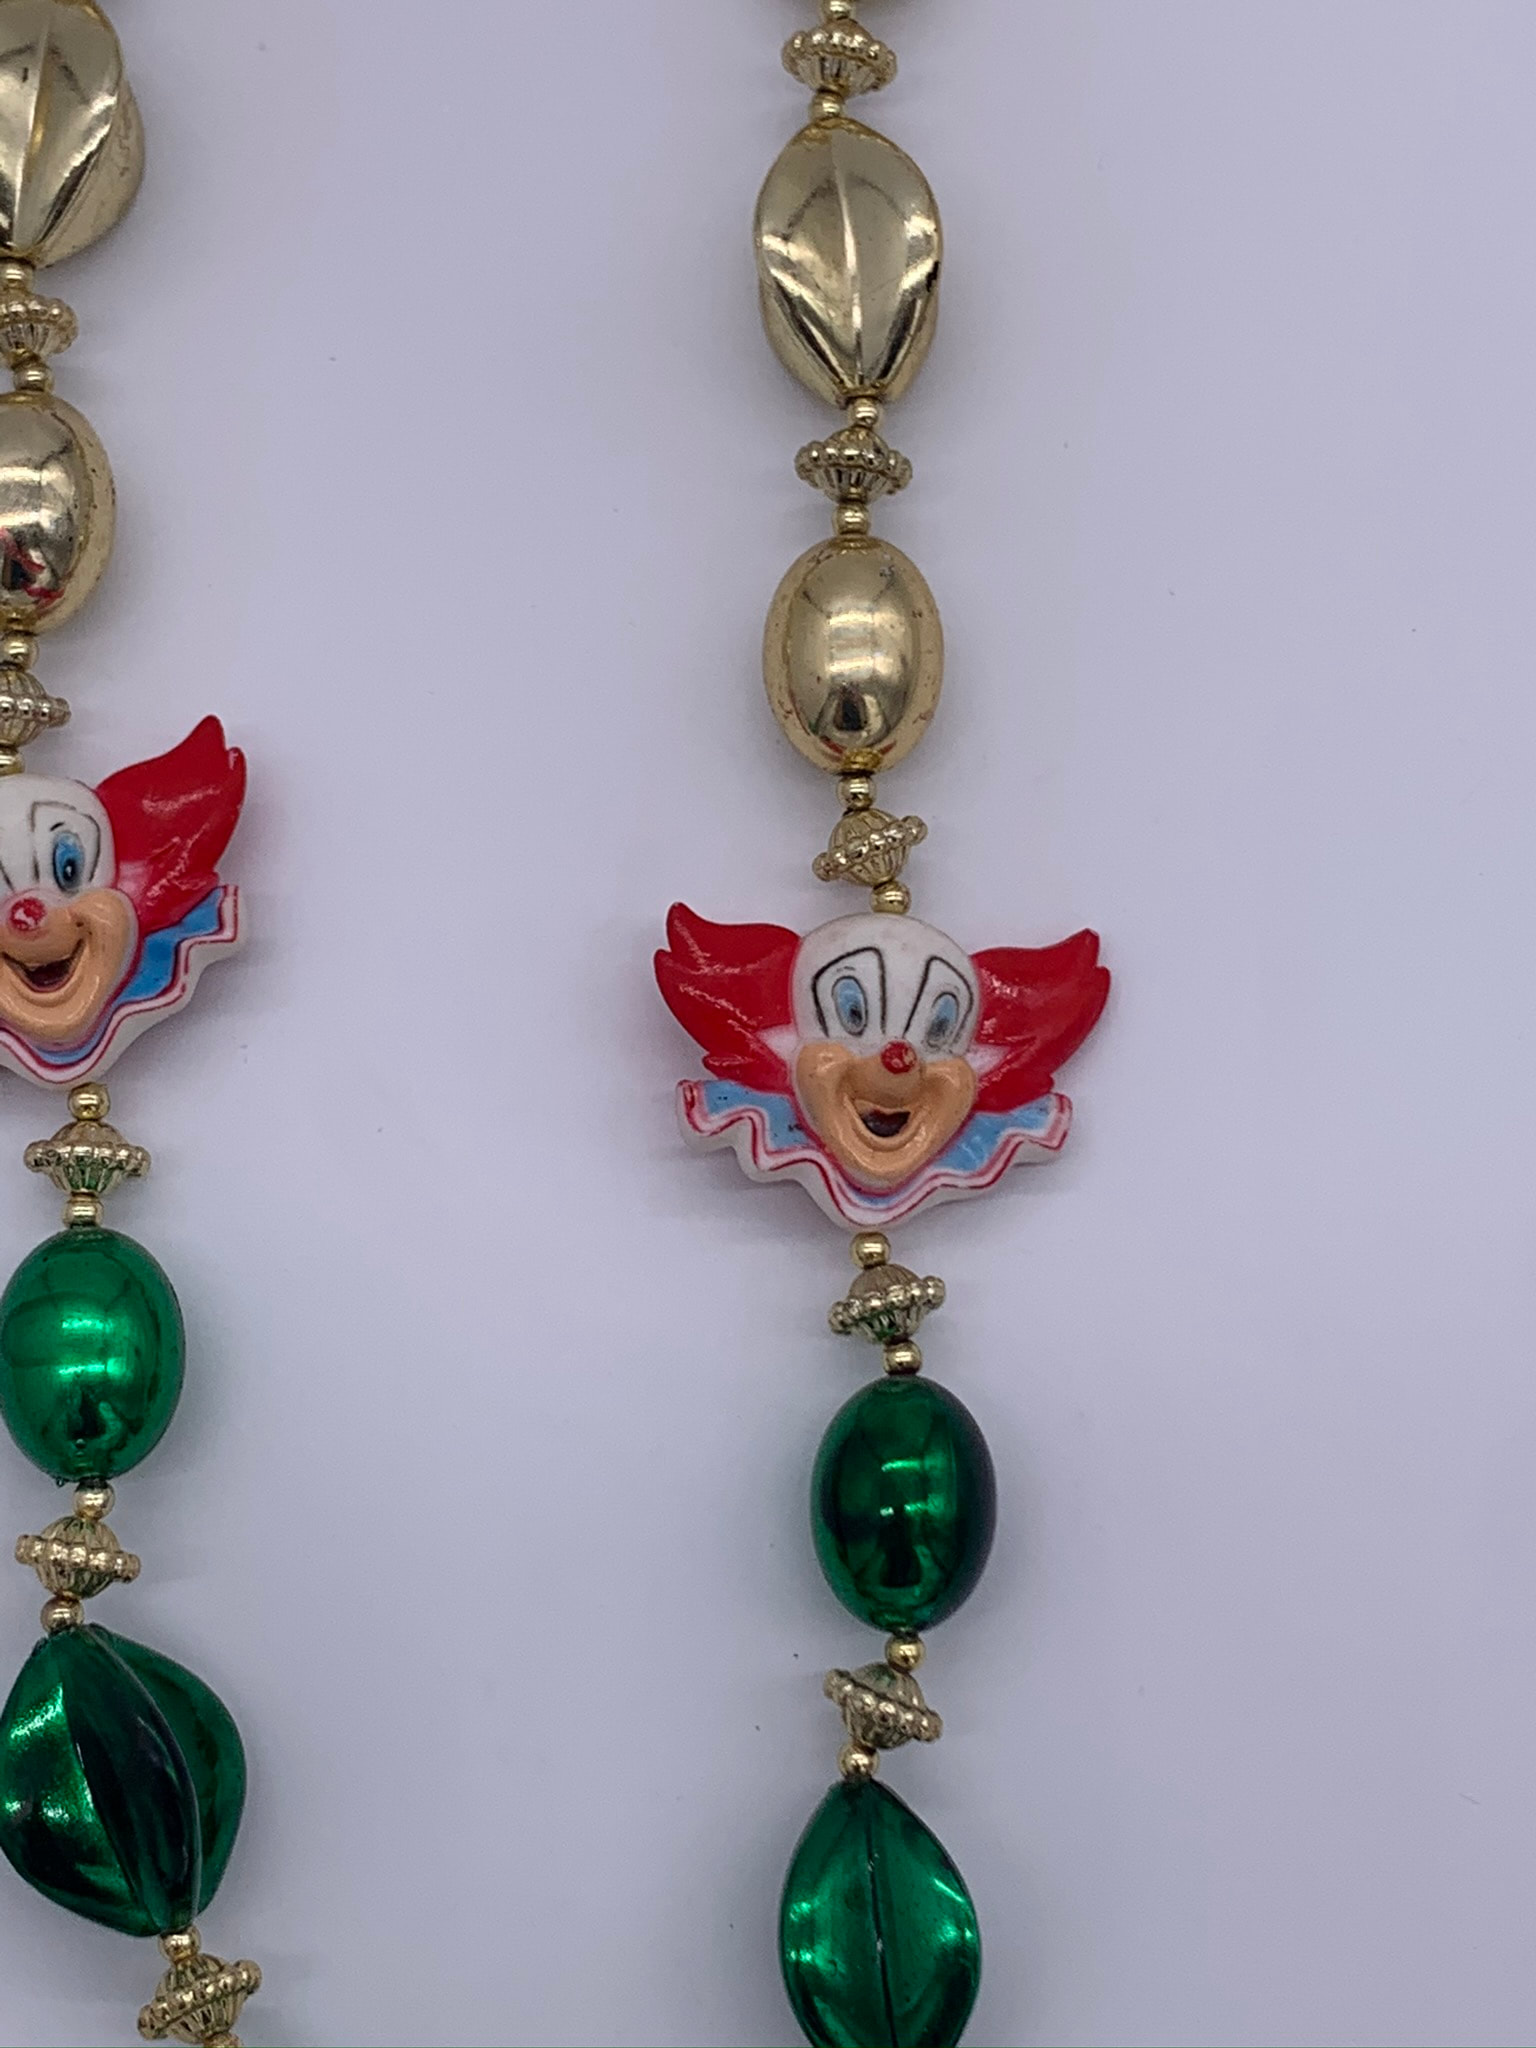 clown beads, clown beads Suppliers and Manufacturers at